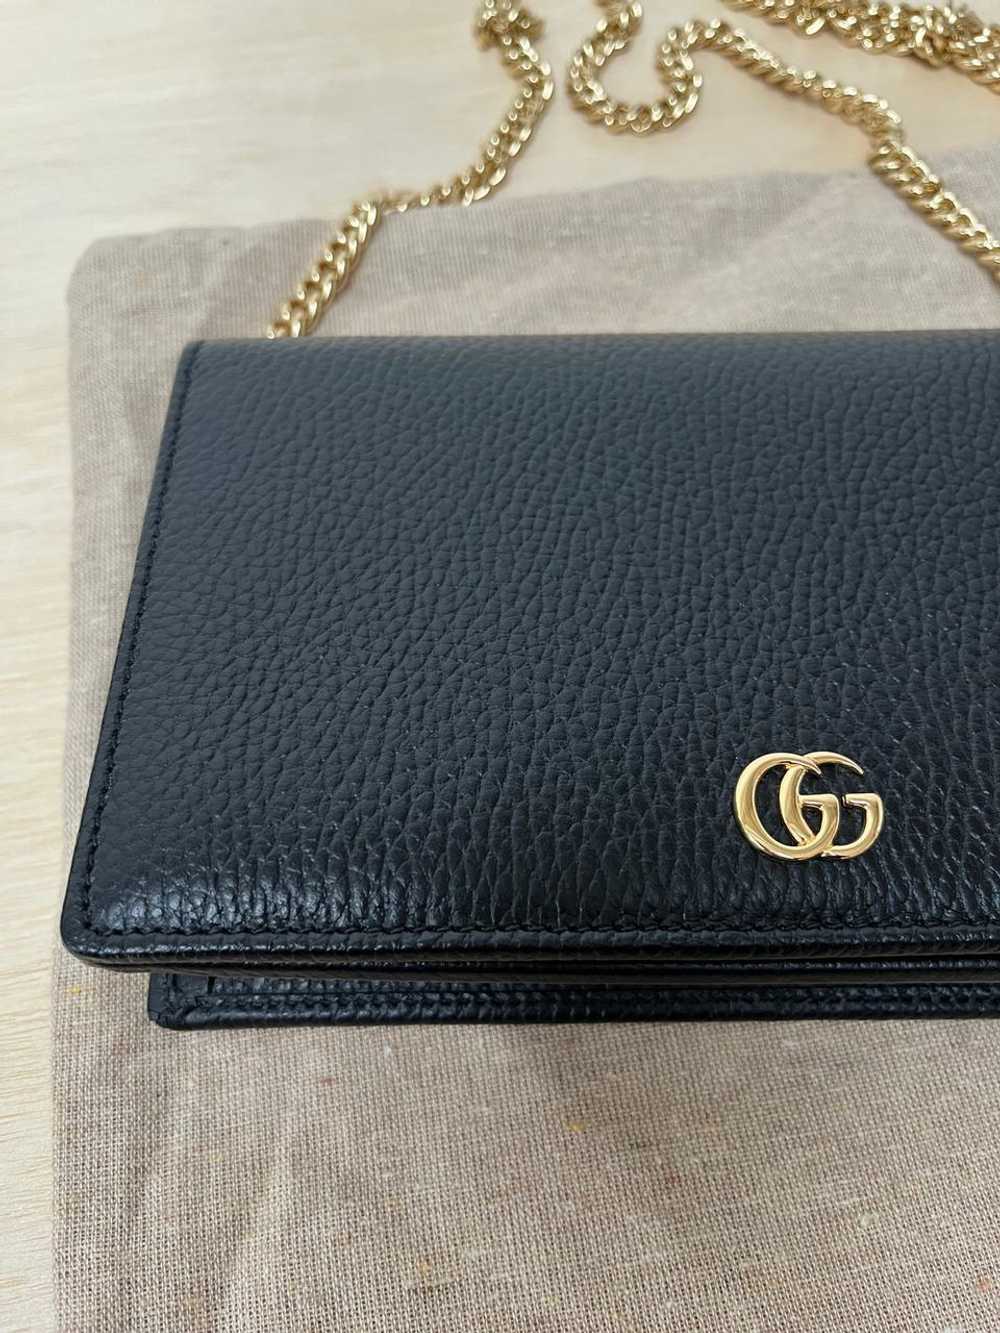 Gucci GG Marmont mini chain bag | Used, Secondhan… - image 1